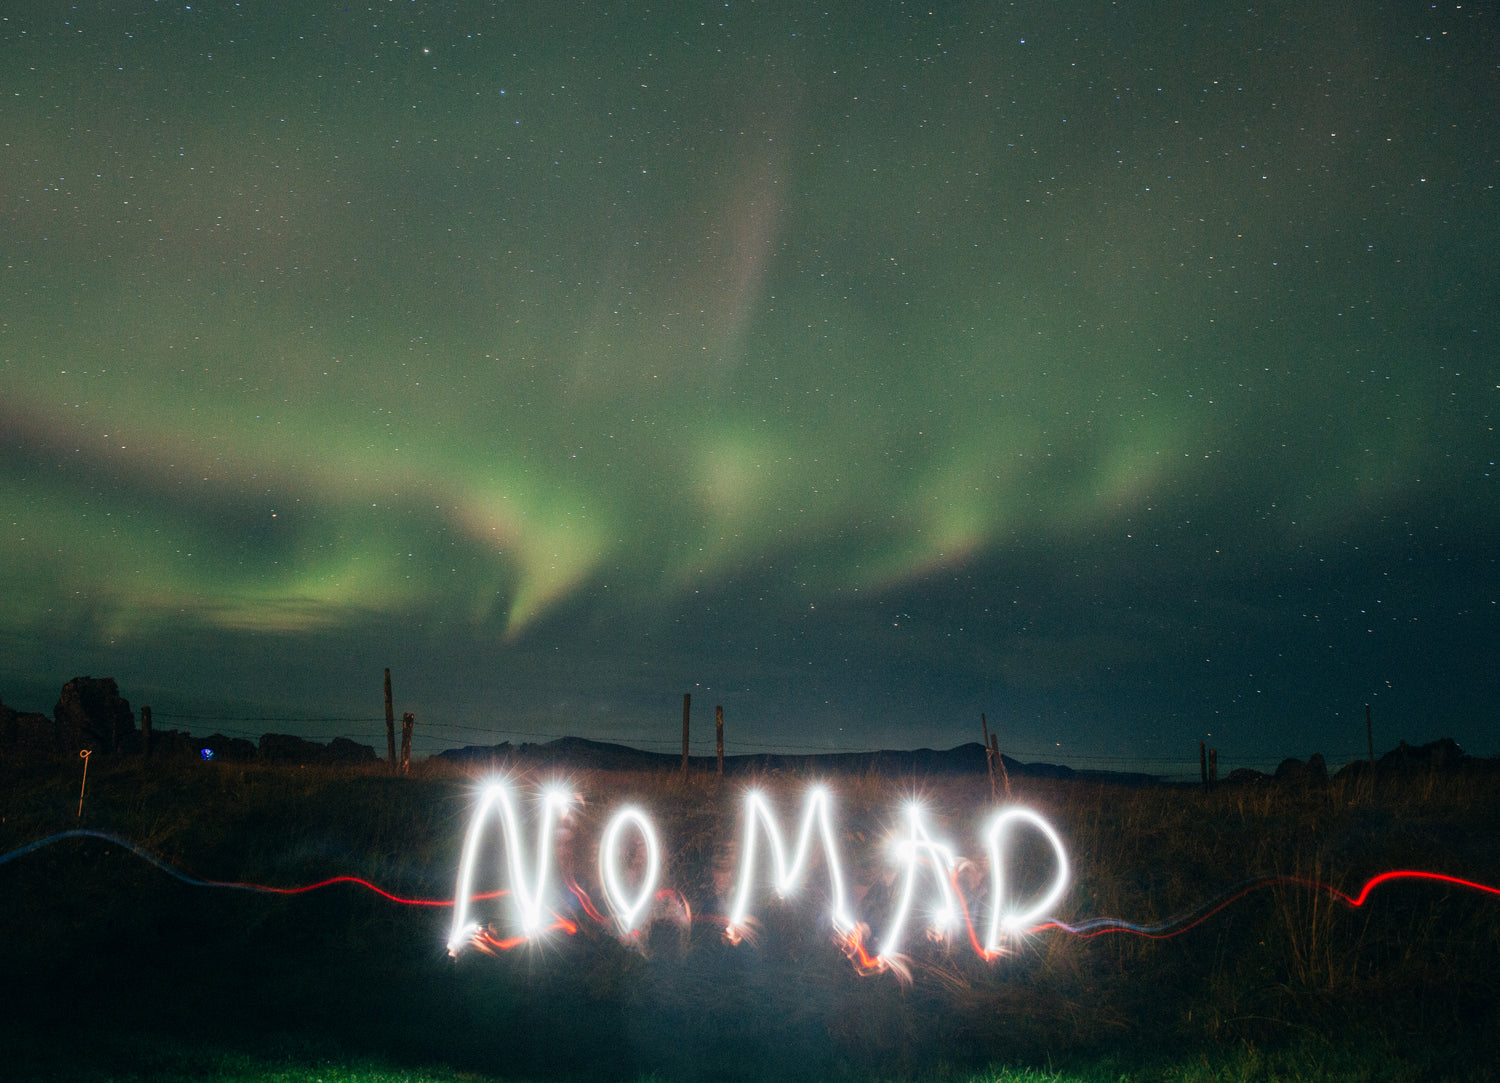  The photograph captures the ethereal beauty of the Northern Lights in a starlit sky, with an artistic light painting spelling out "NOMAD" in the foreground. The dynamic interplay of natural aurora borealis and human-made light art creates a vivid and memorable scene.